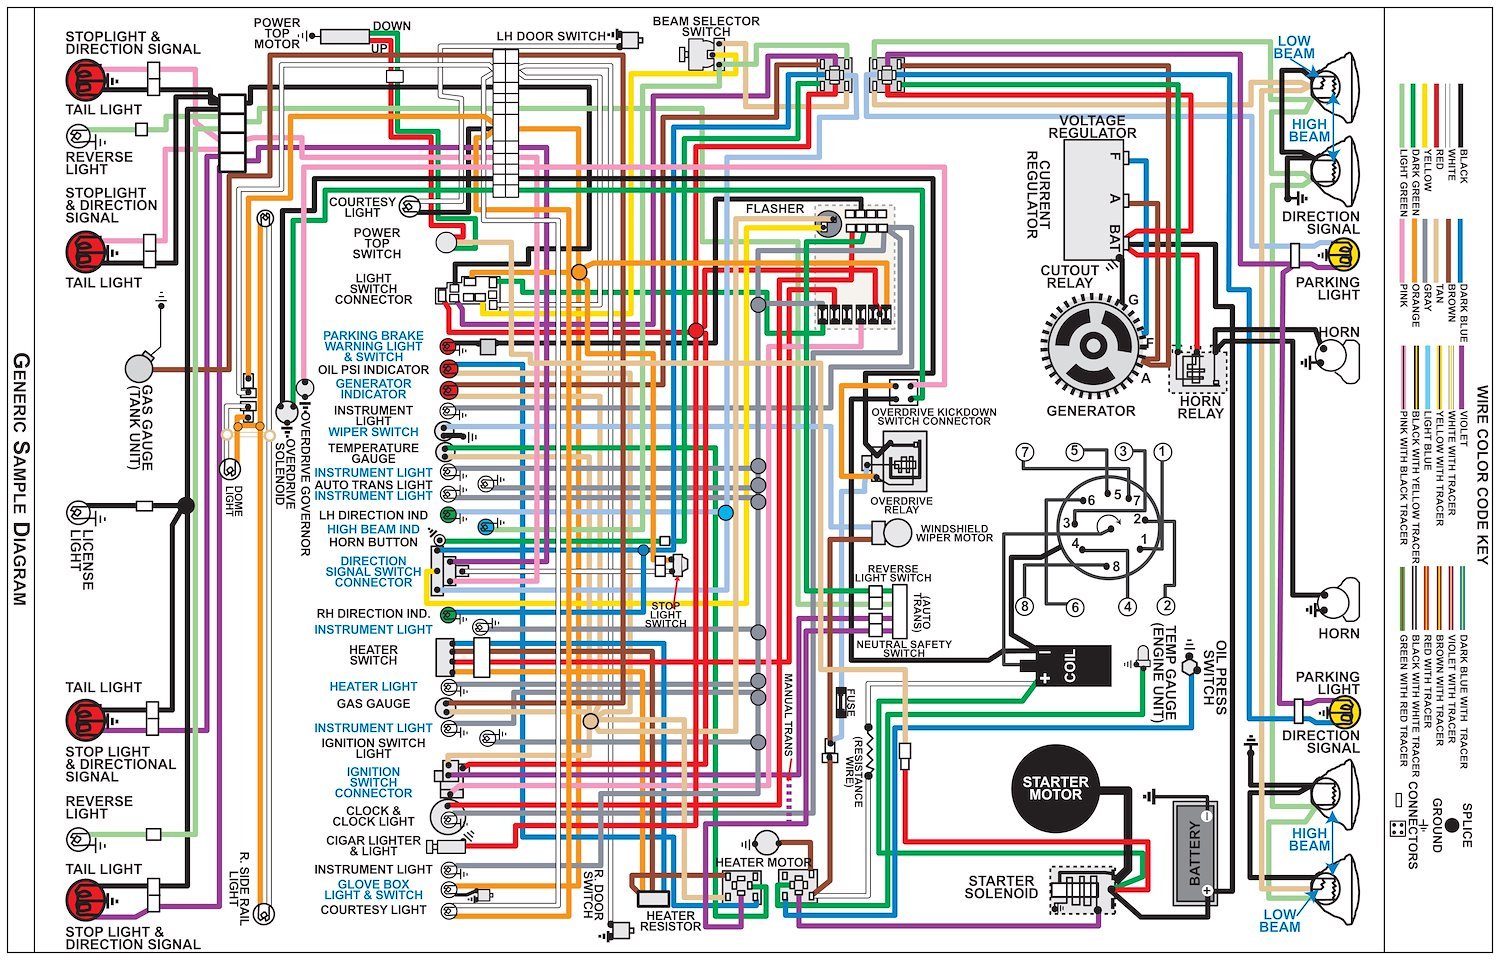 Wiring Diagram for 1965 Plymouth Barracuda, Valiant, 11 in x 17 in., Laminated